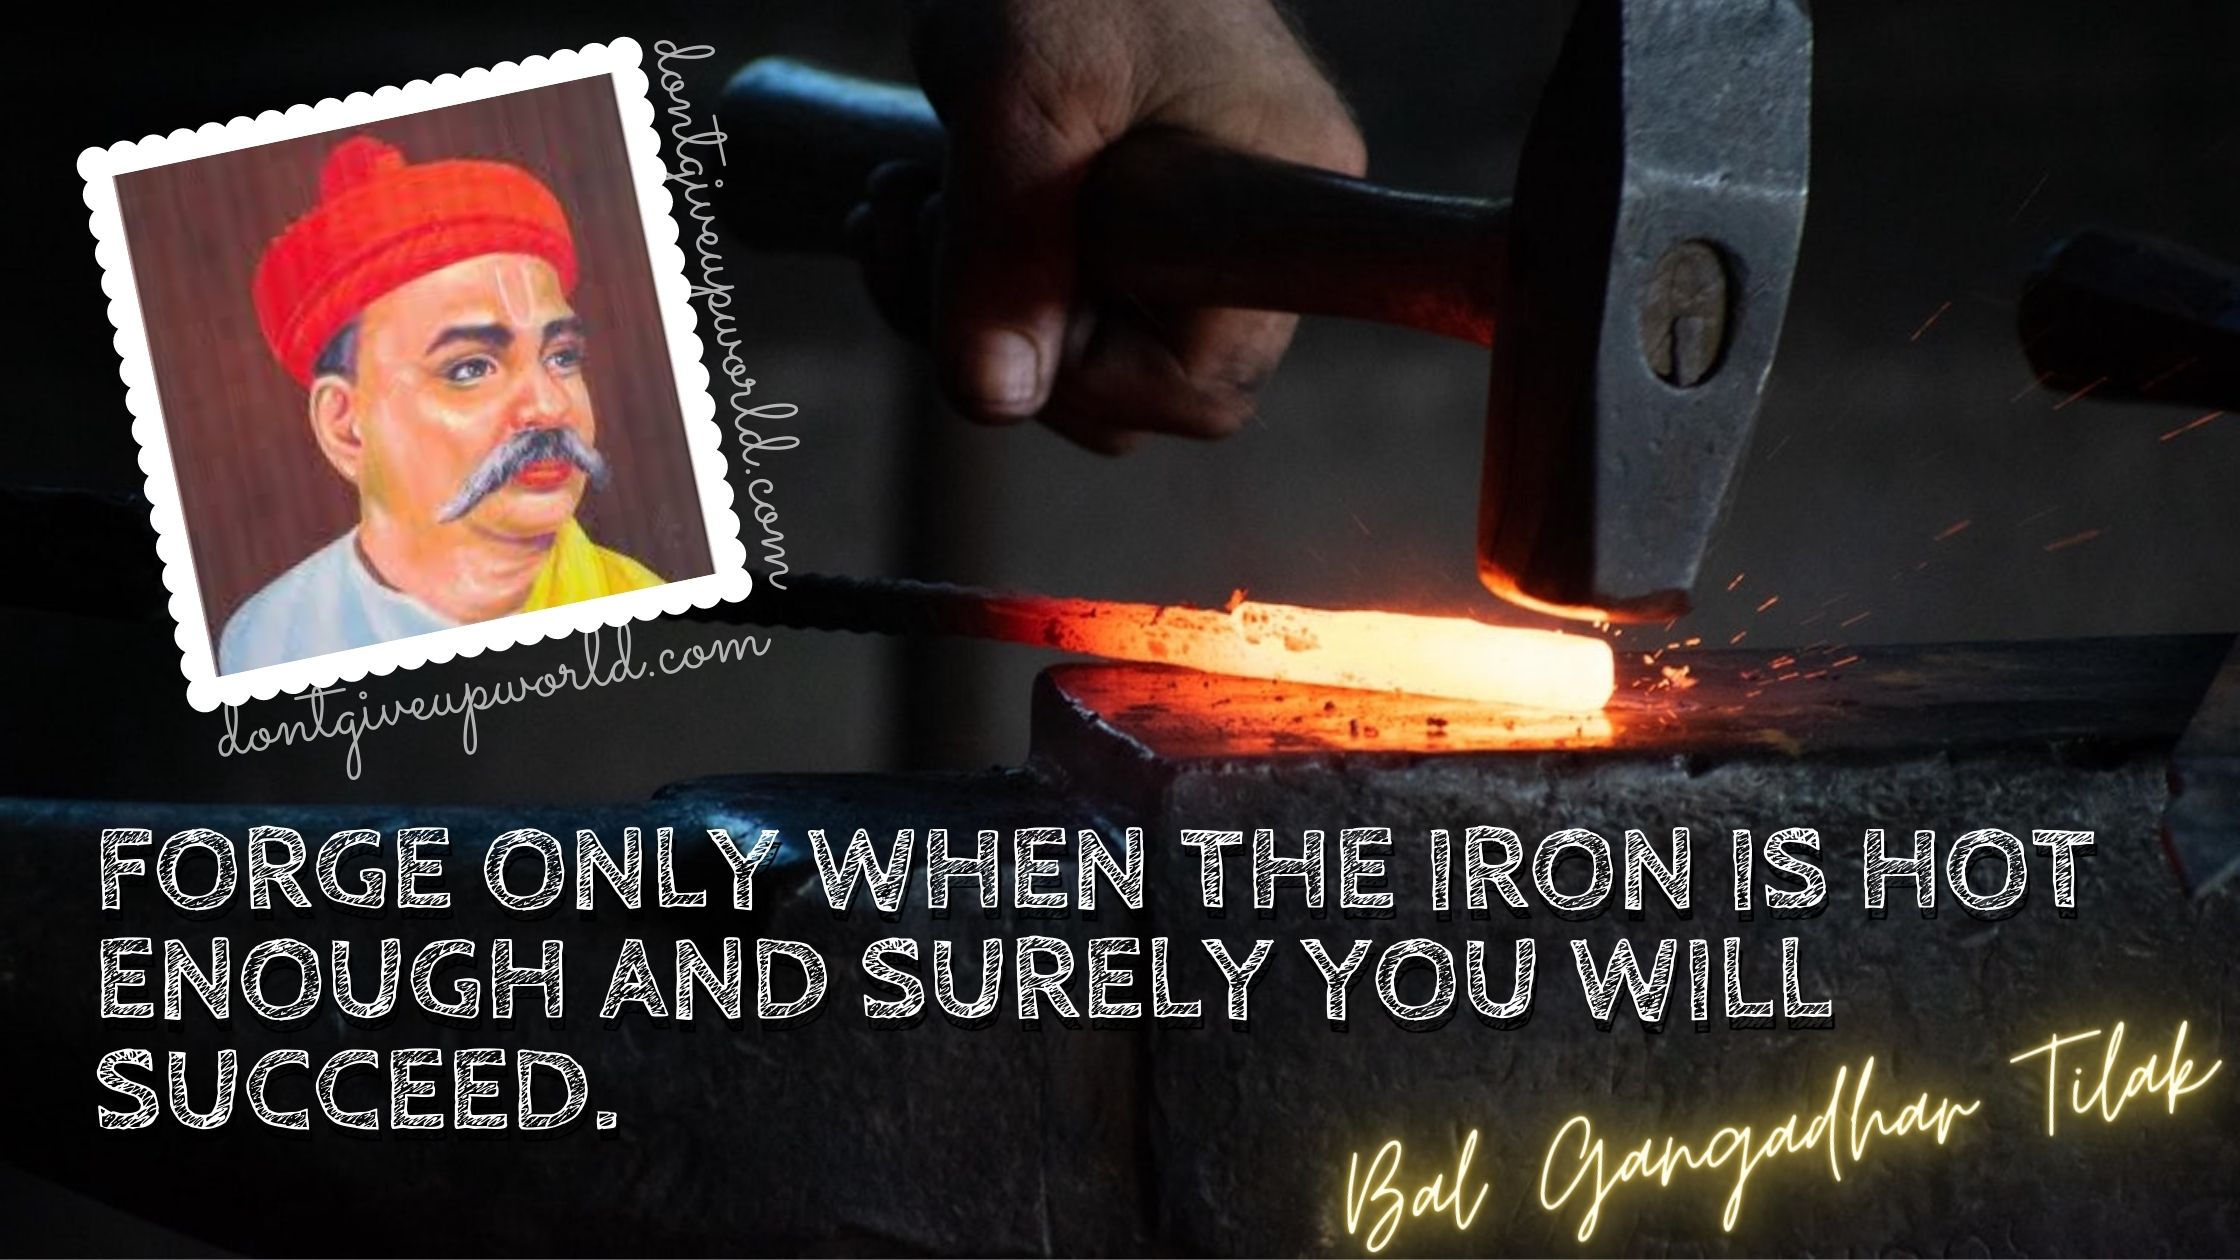 bal gangadhar wallpaper with quotes forge when iron is hot for a sure success
bal gangadhar tilak 100th death anniversary
forging iron 
